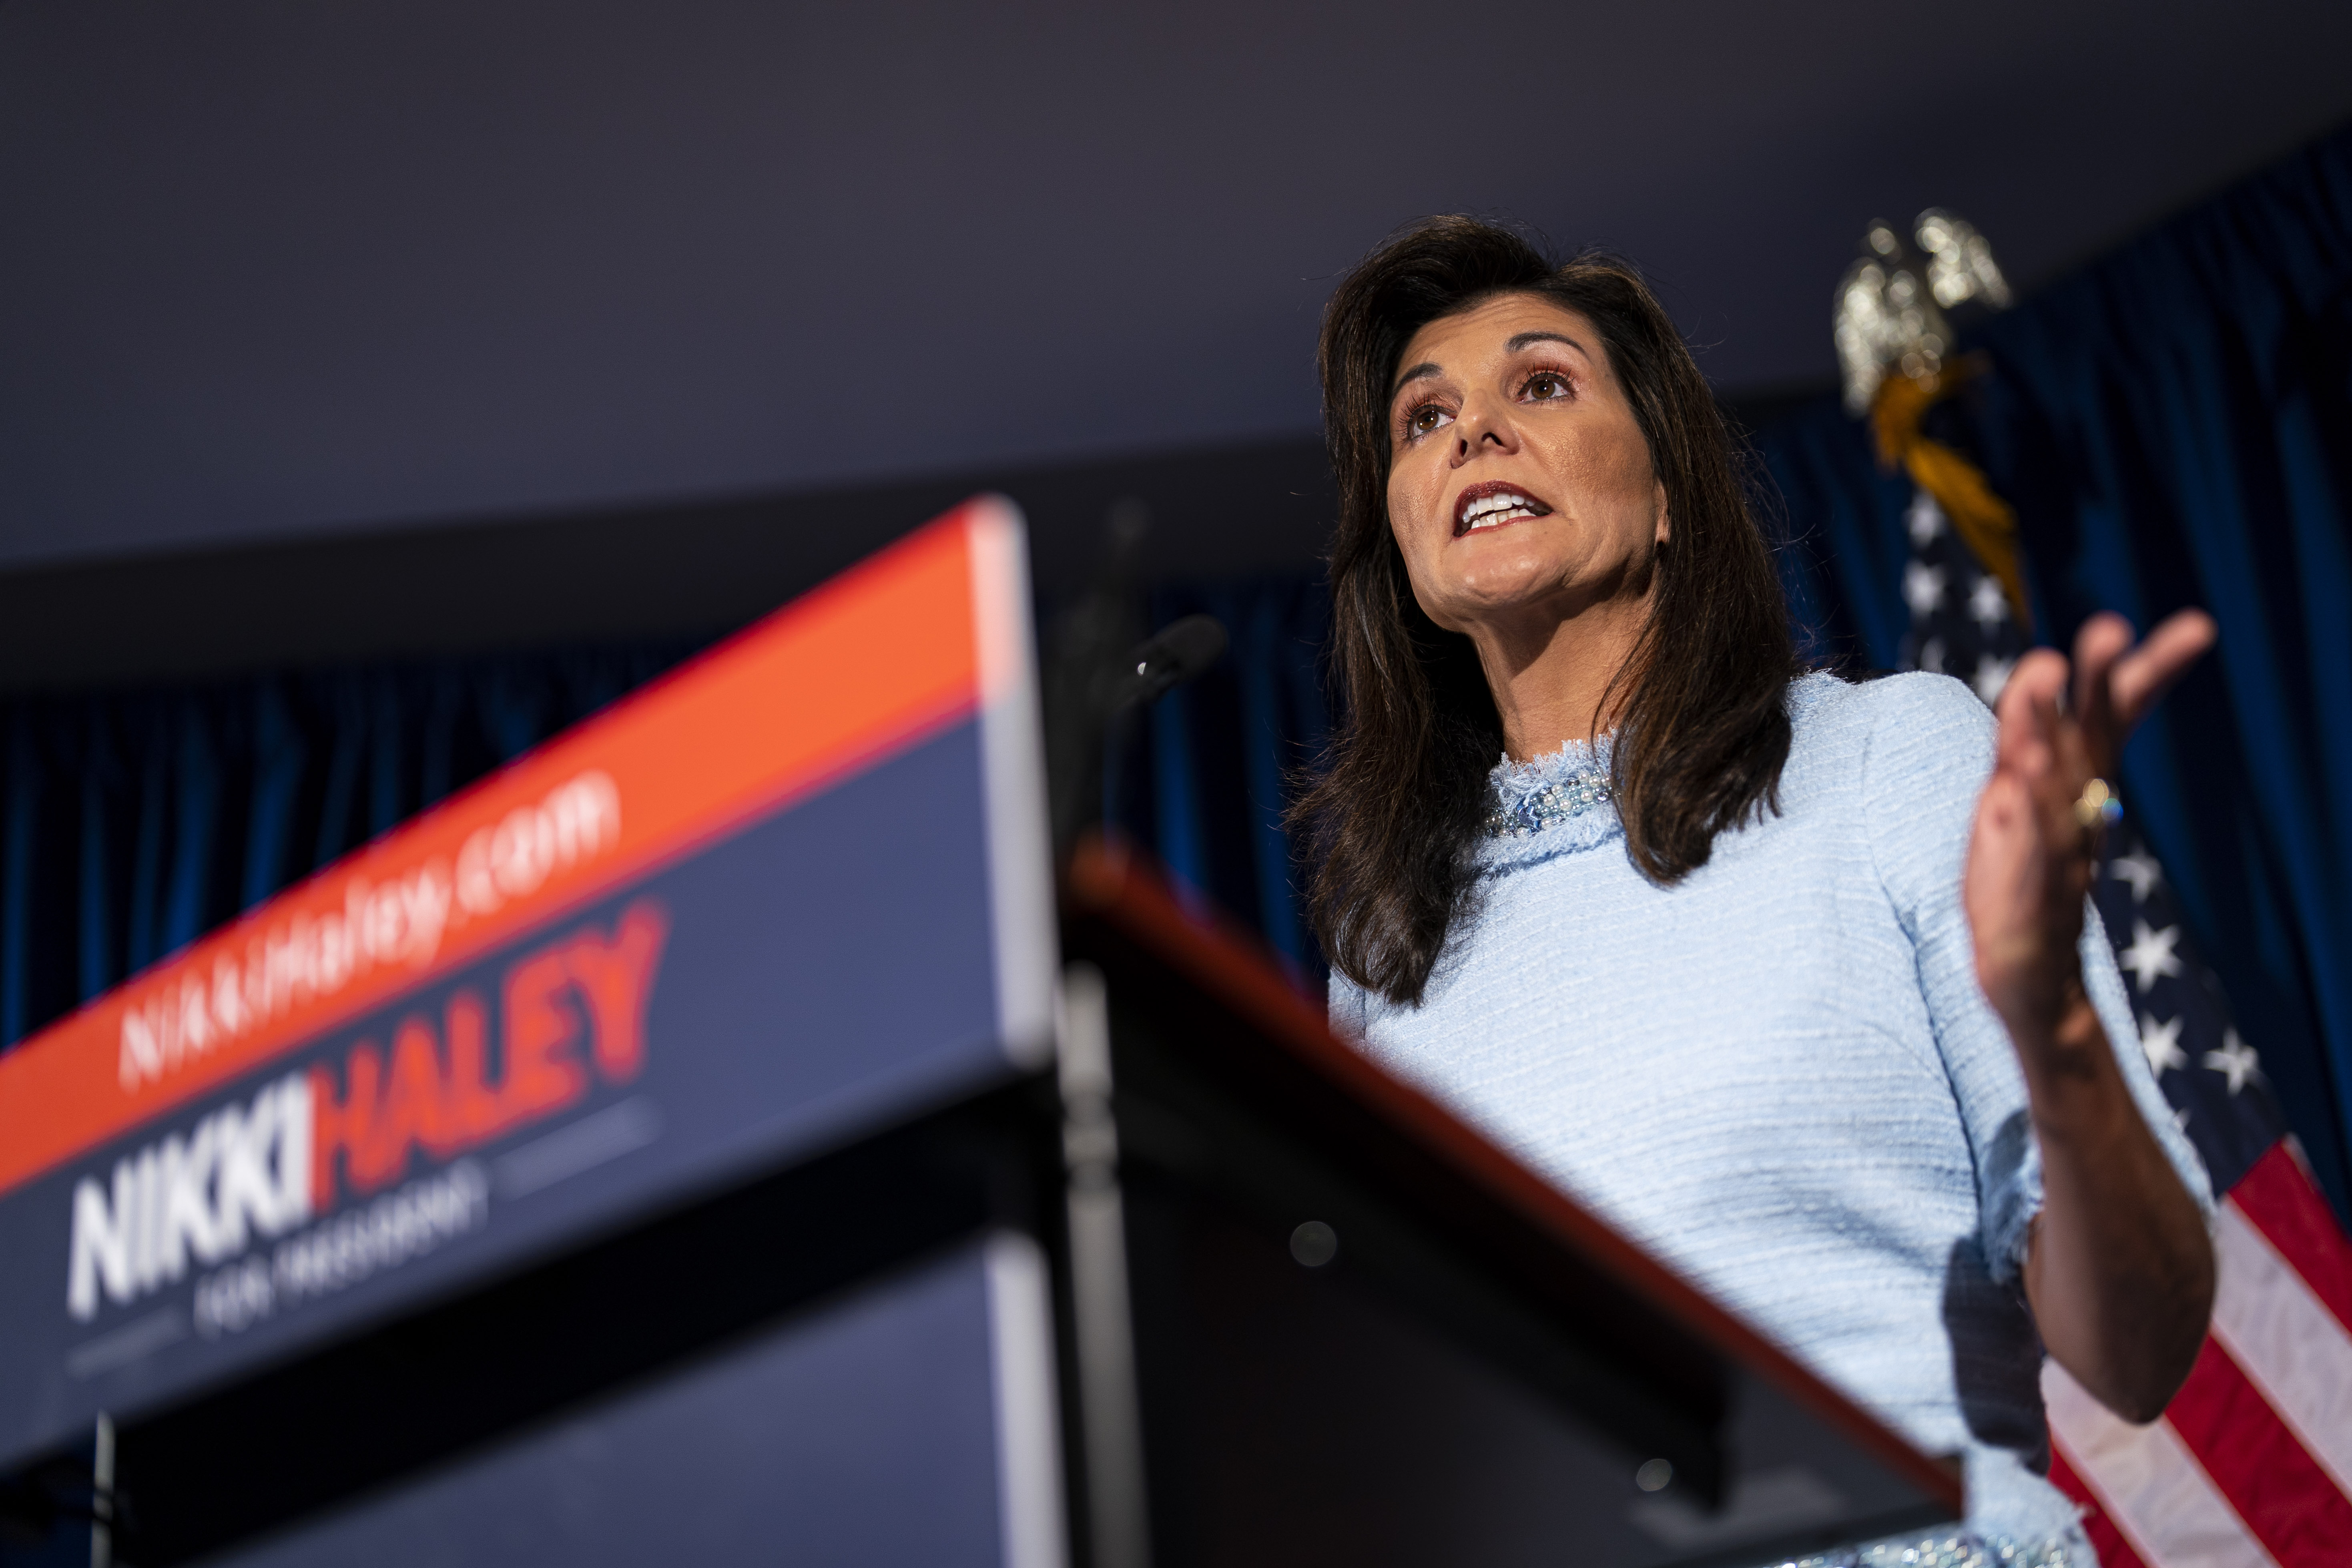 Nikki Haley, former ambassador to the United Nations, speaks at the Susan B. Anthony Pro-Life America headquarters in Arlington, Virginia, US, on Tuesday, April 25, 2023. (Al Drago/Bloomberg via Getty Images)